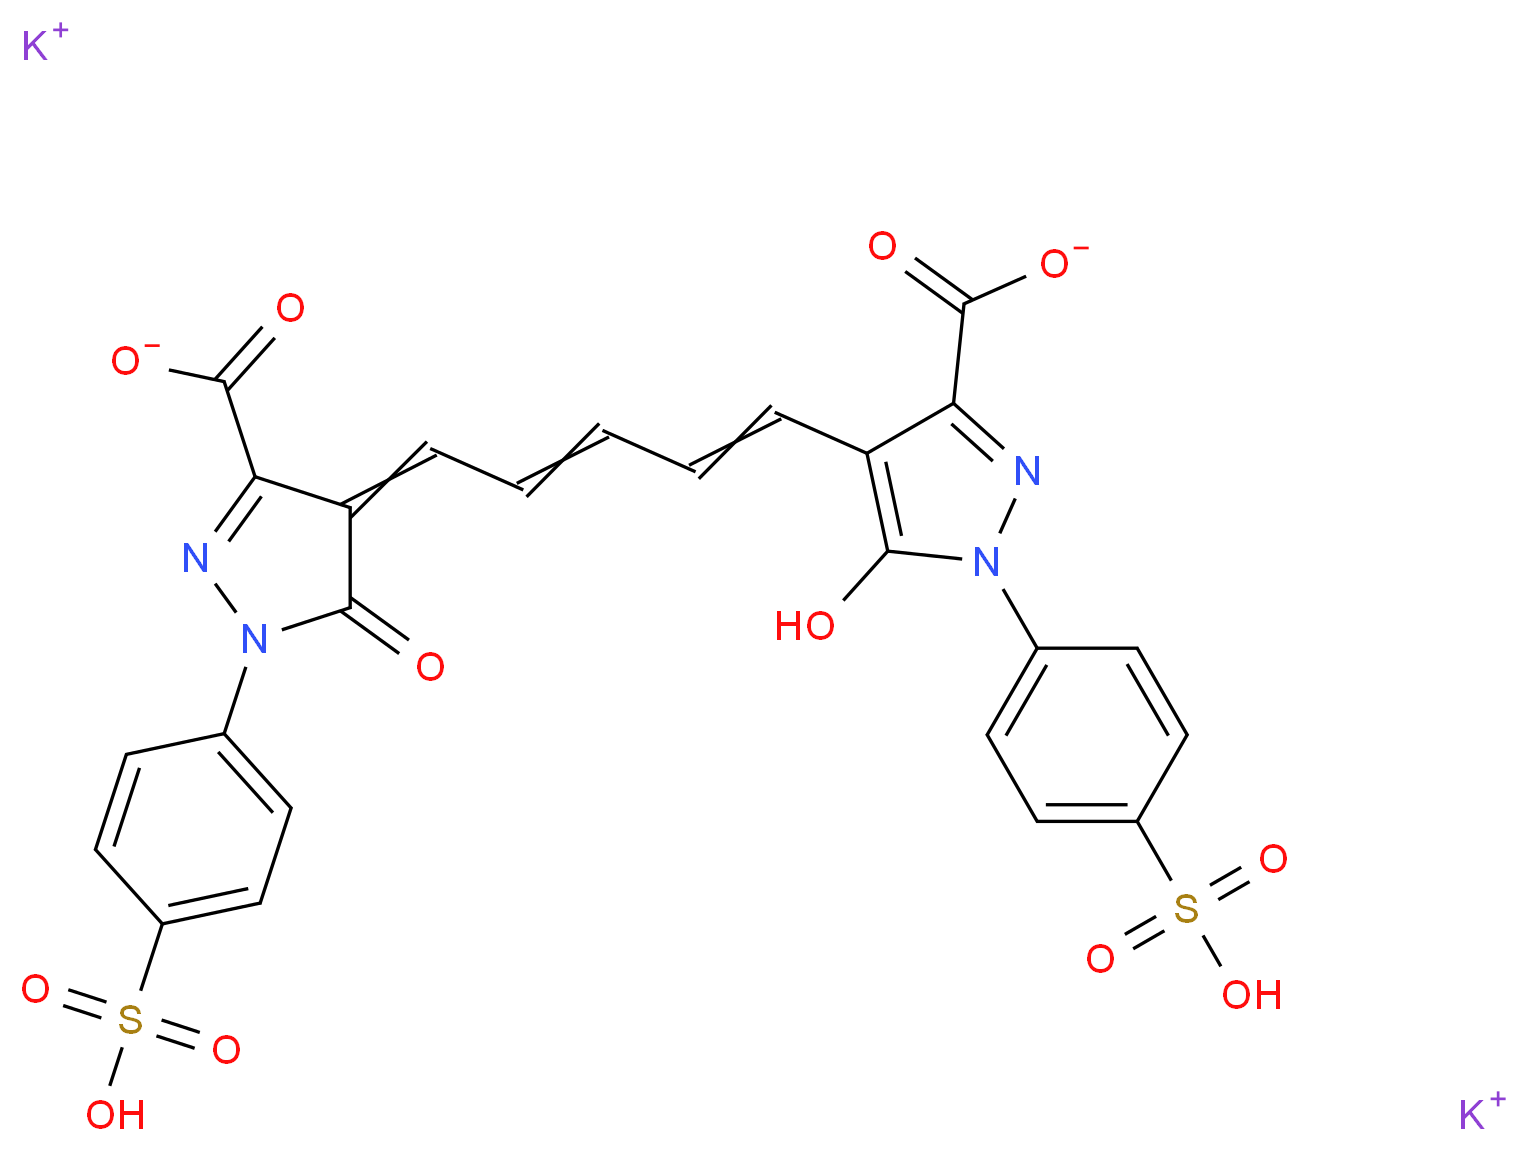 dipotassium 4-{5-[3-carboxylato-5-oxo-1-(4-sulfophenyl)-4,5-dihydro-1H-pyrazol-4-ylidene]penta-1,3-dien-1-yl}-5-hydroxy-1-(4-sulfophenyl)-1H-pyrazole-3-carboxylate_分子结构_CAS_51858-17-4